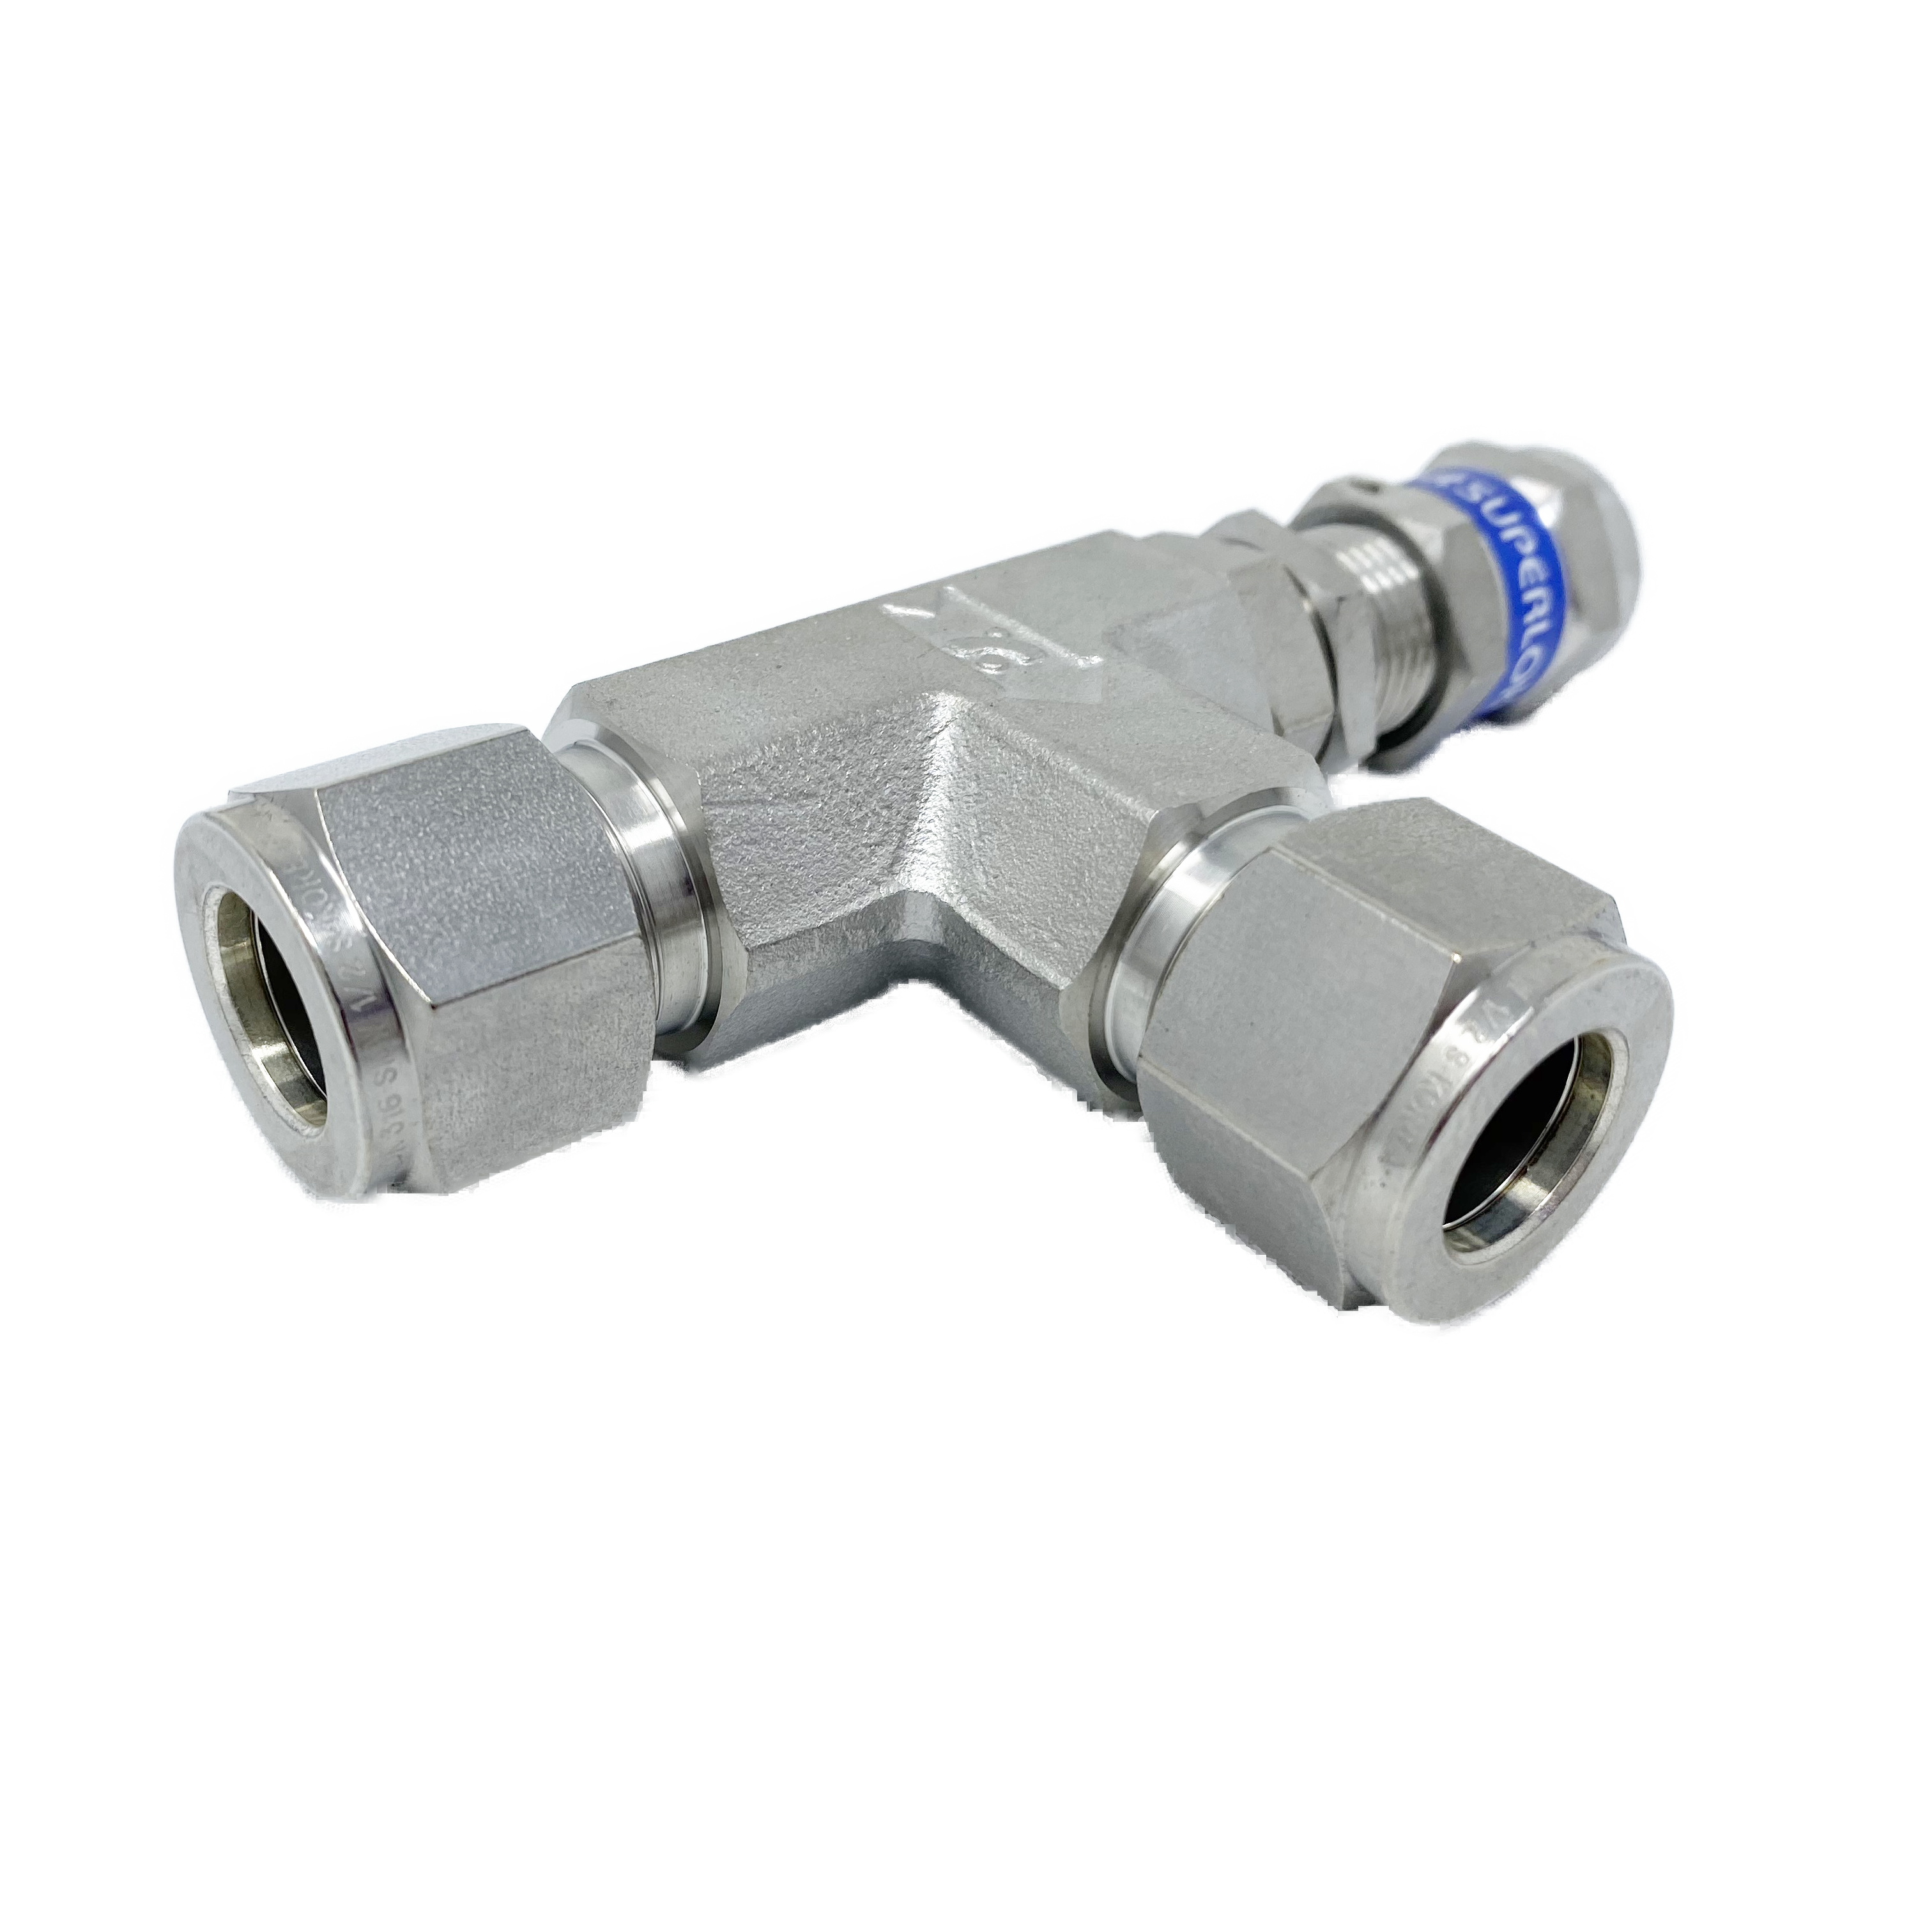 SRVL-S-6-N : Superlok Inline Relief Valve, 1/4" O.D. Tube, Angle Pattern, Buna N O-Ring, 300psi, 316SS, No Spring